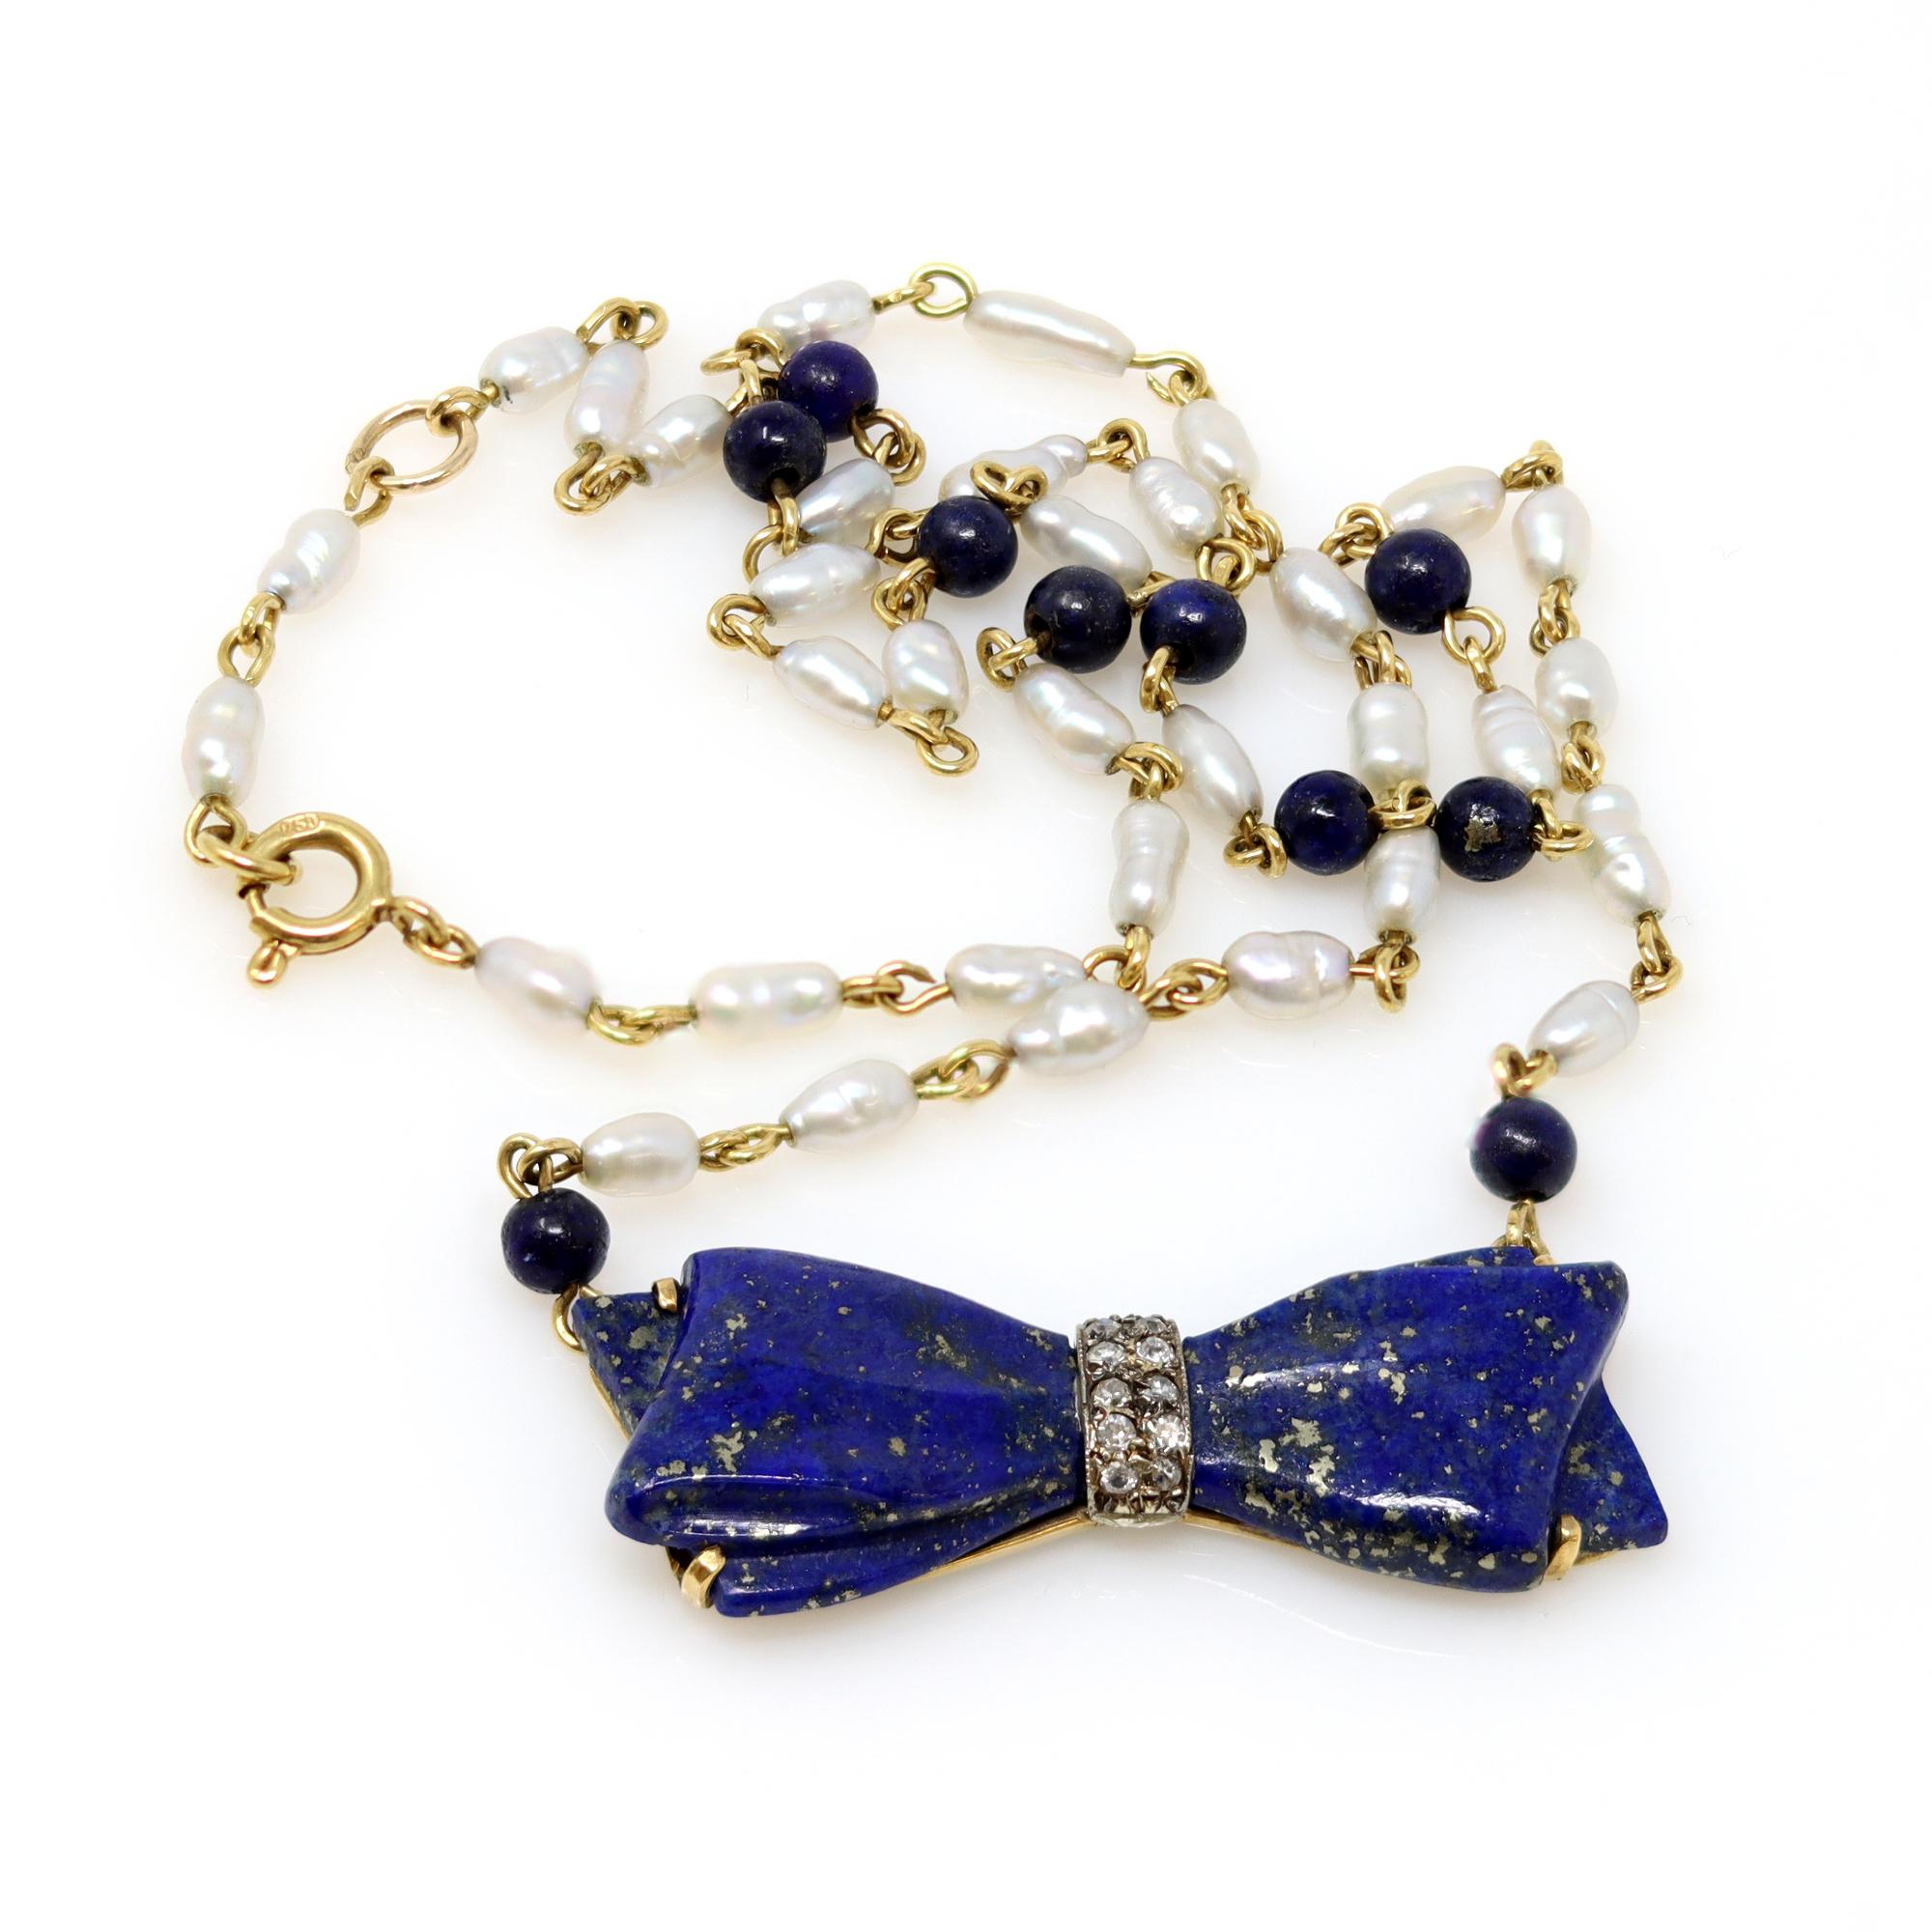 The necklace circa 1960 is a combination of an antique lapis lazuli bow silver top on gold with old mine cut diamond accents in its center and a station chain ca.1960 with lapis lazuli beads and small silver sea water pearls. The gold on the bow is